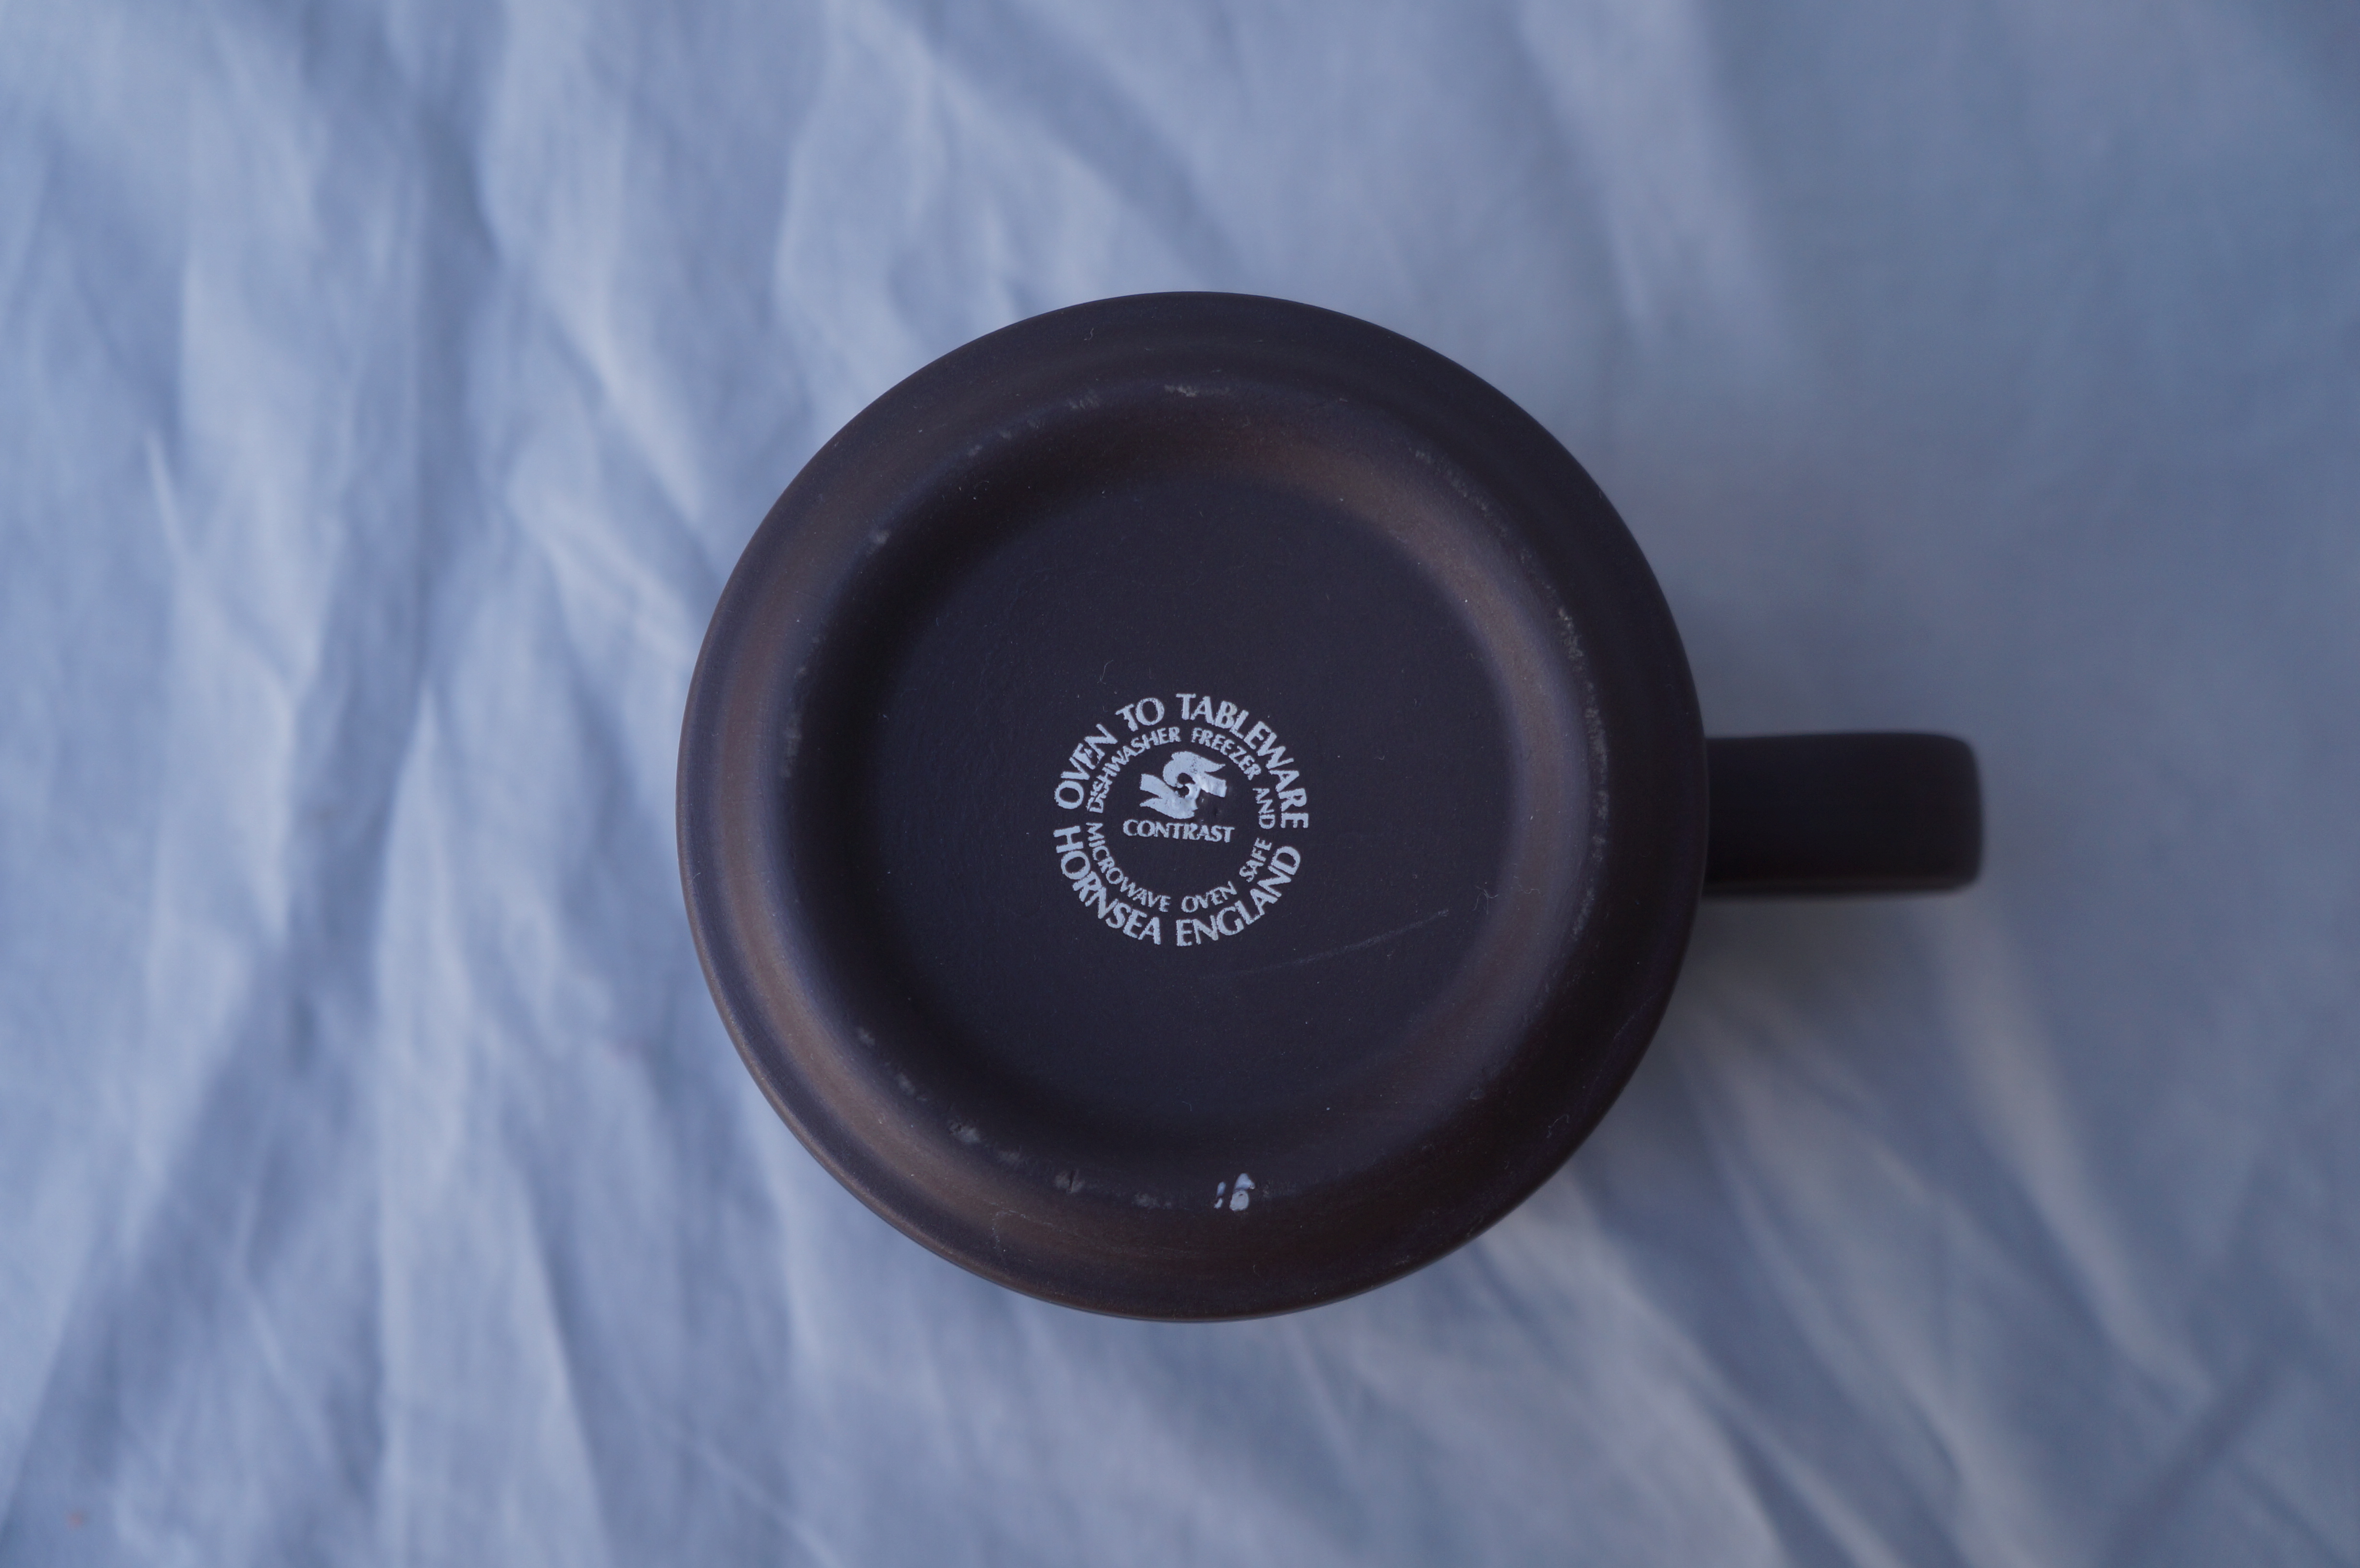 UK Vintage HORNSEA "Contrast" Cup and Saucer/イギリス ヴィンテージ ホーンジー "コントラスト" カップ＆ソーサー